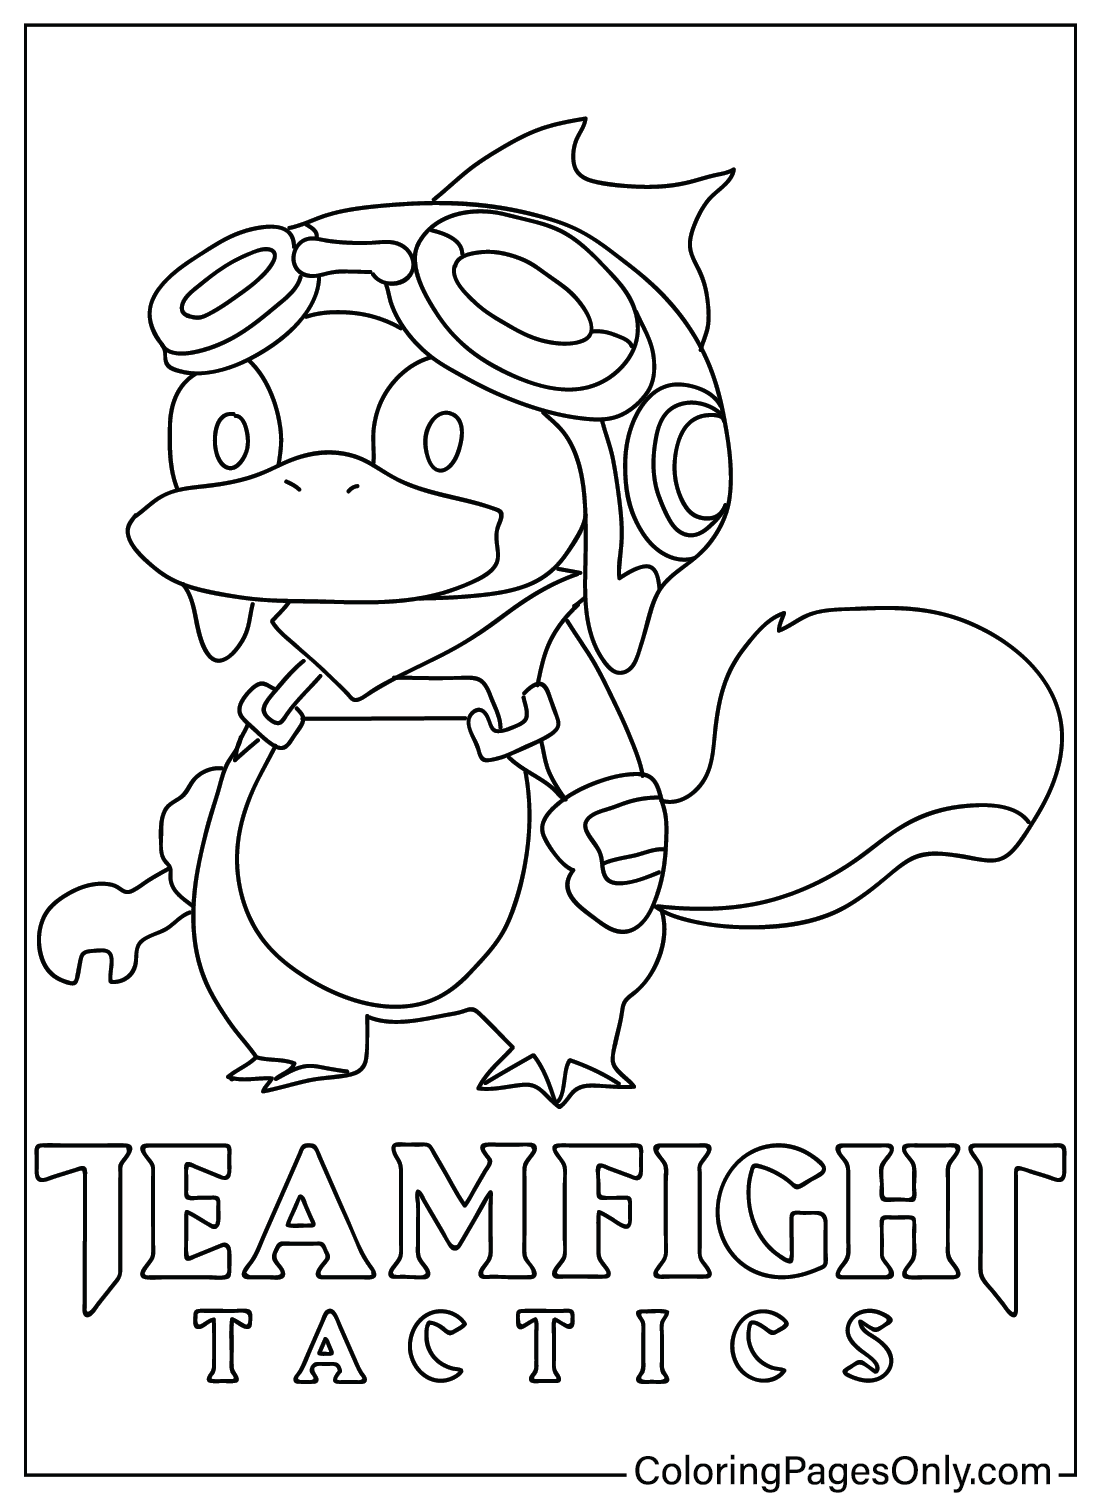 Duckbill Teamfight Tactics Coloring Page from Teamfight Tactics